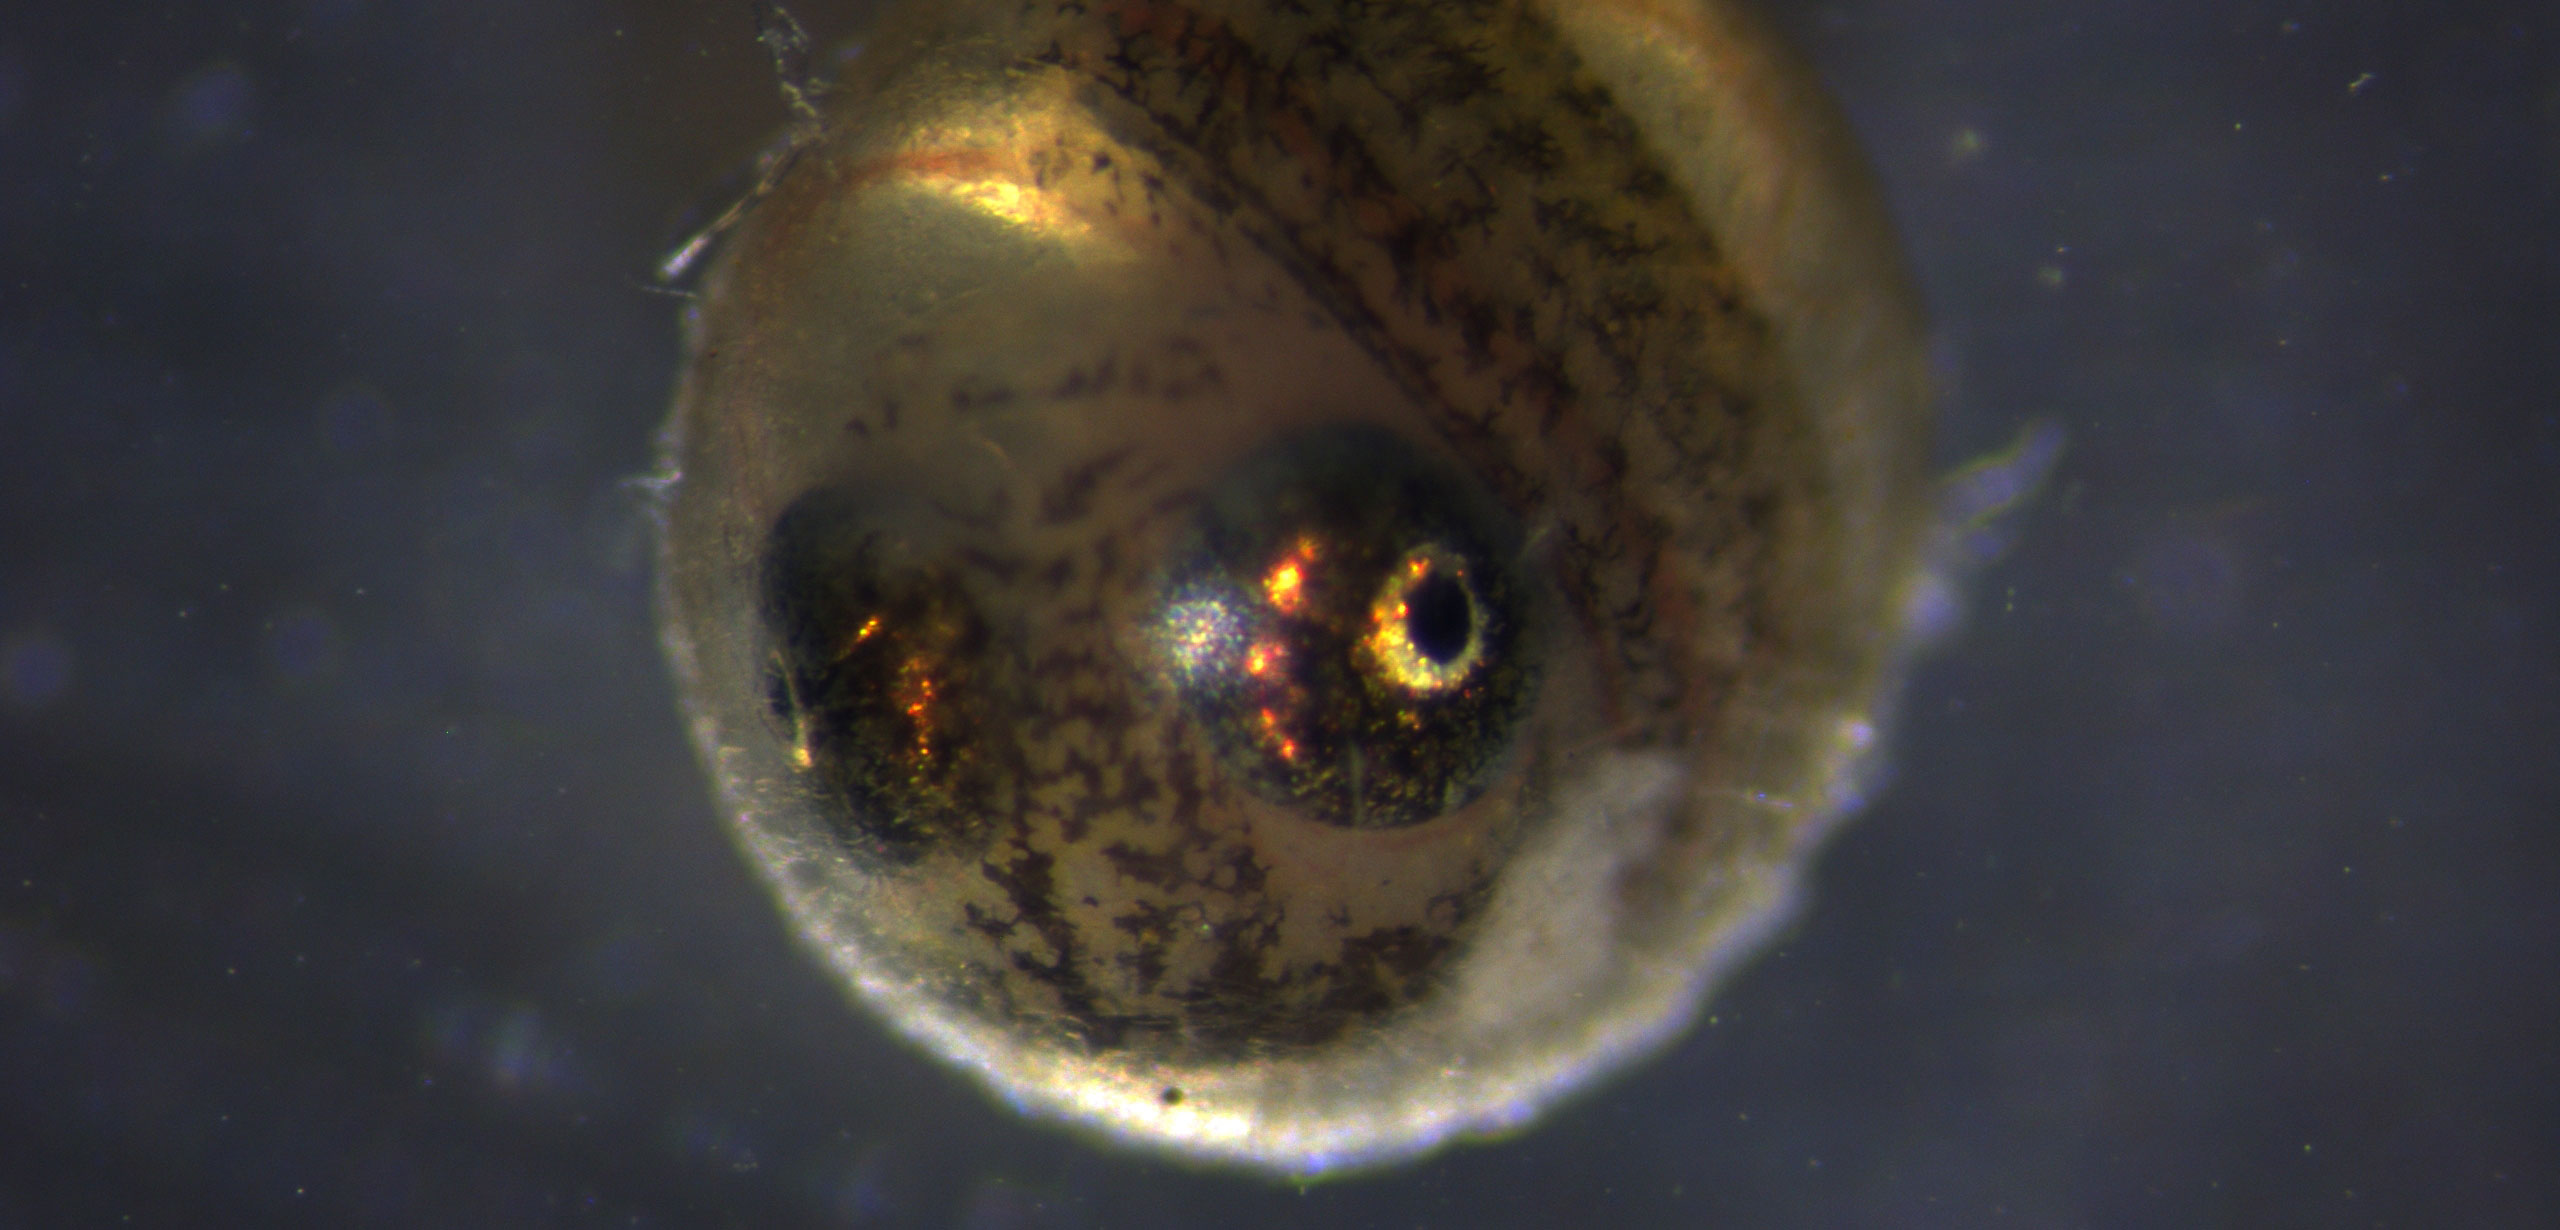 killifish egg that was eaten by a coscoroba swan, seven days before hatching